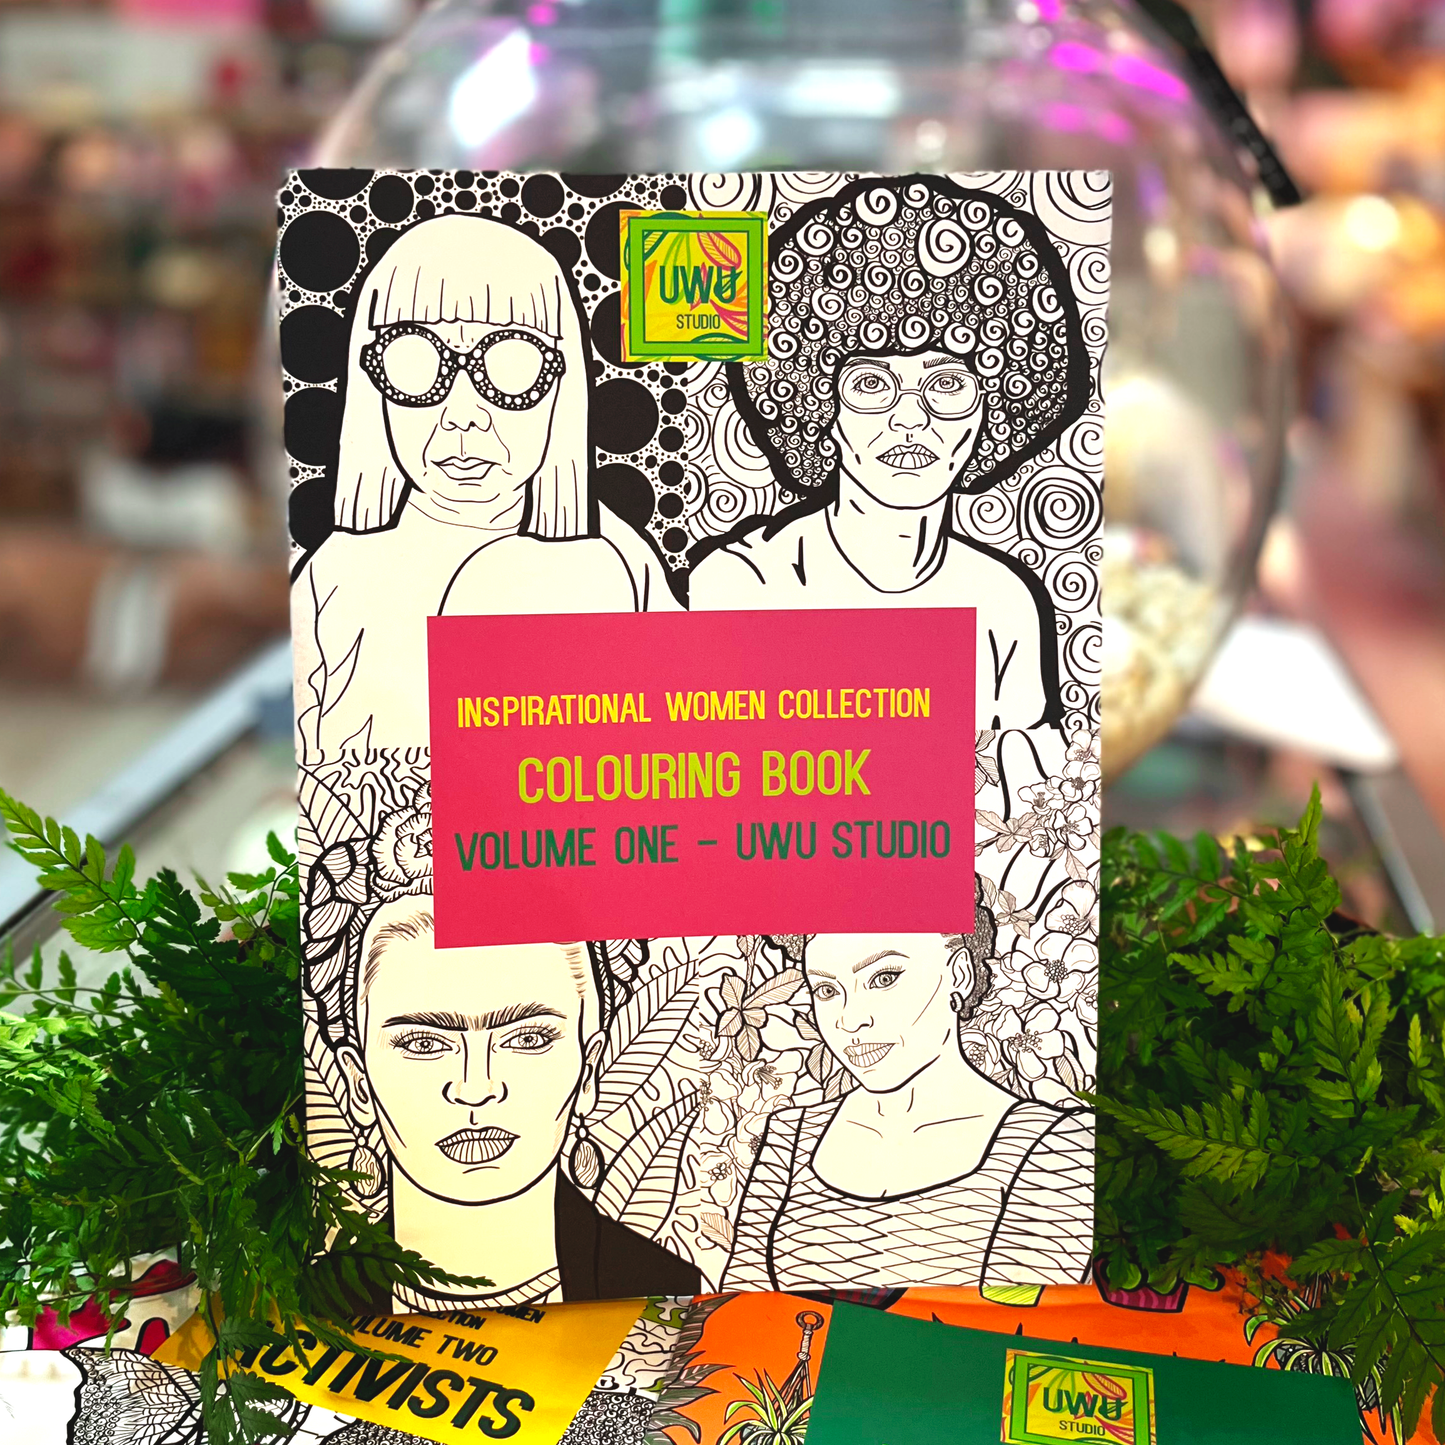 Inspirational Women Volume One Colouring Book